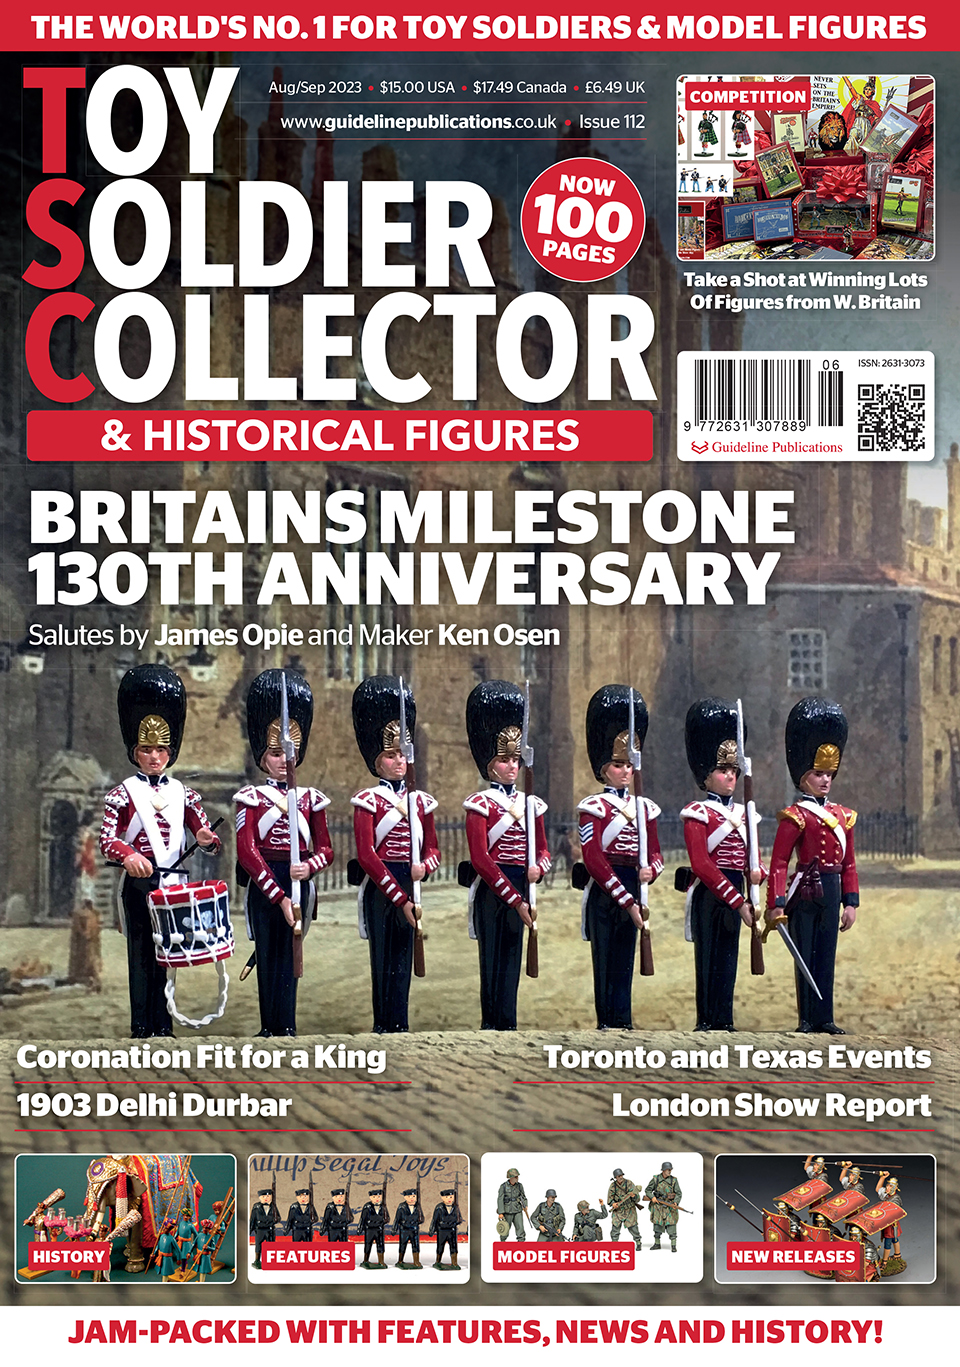 Guideline Publications Ltd Toy Soldier Collector Issue 112 